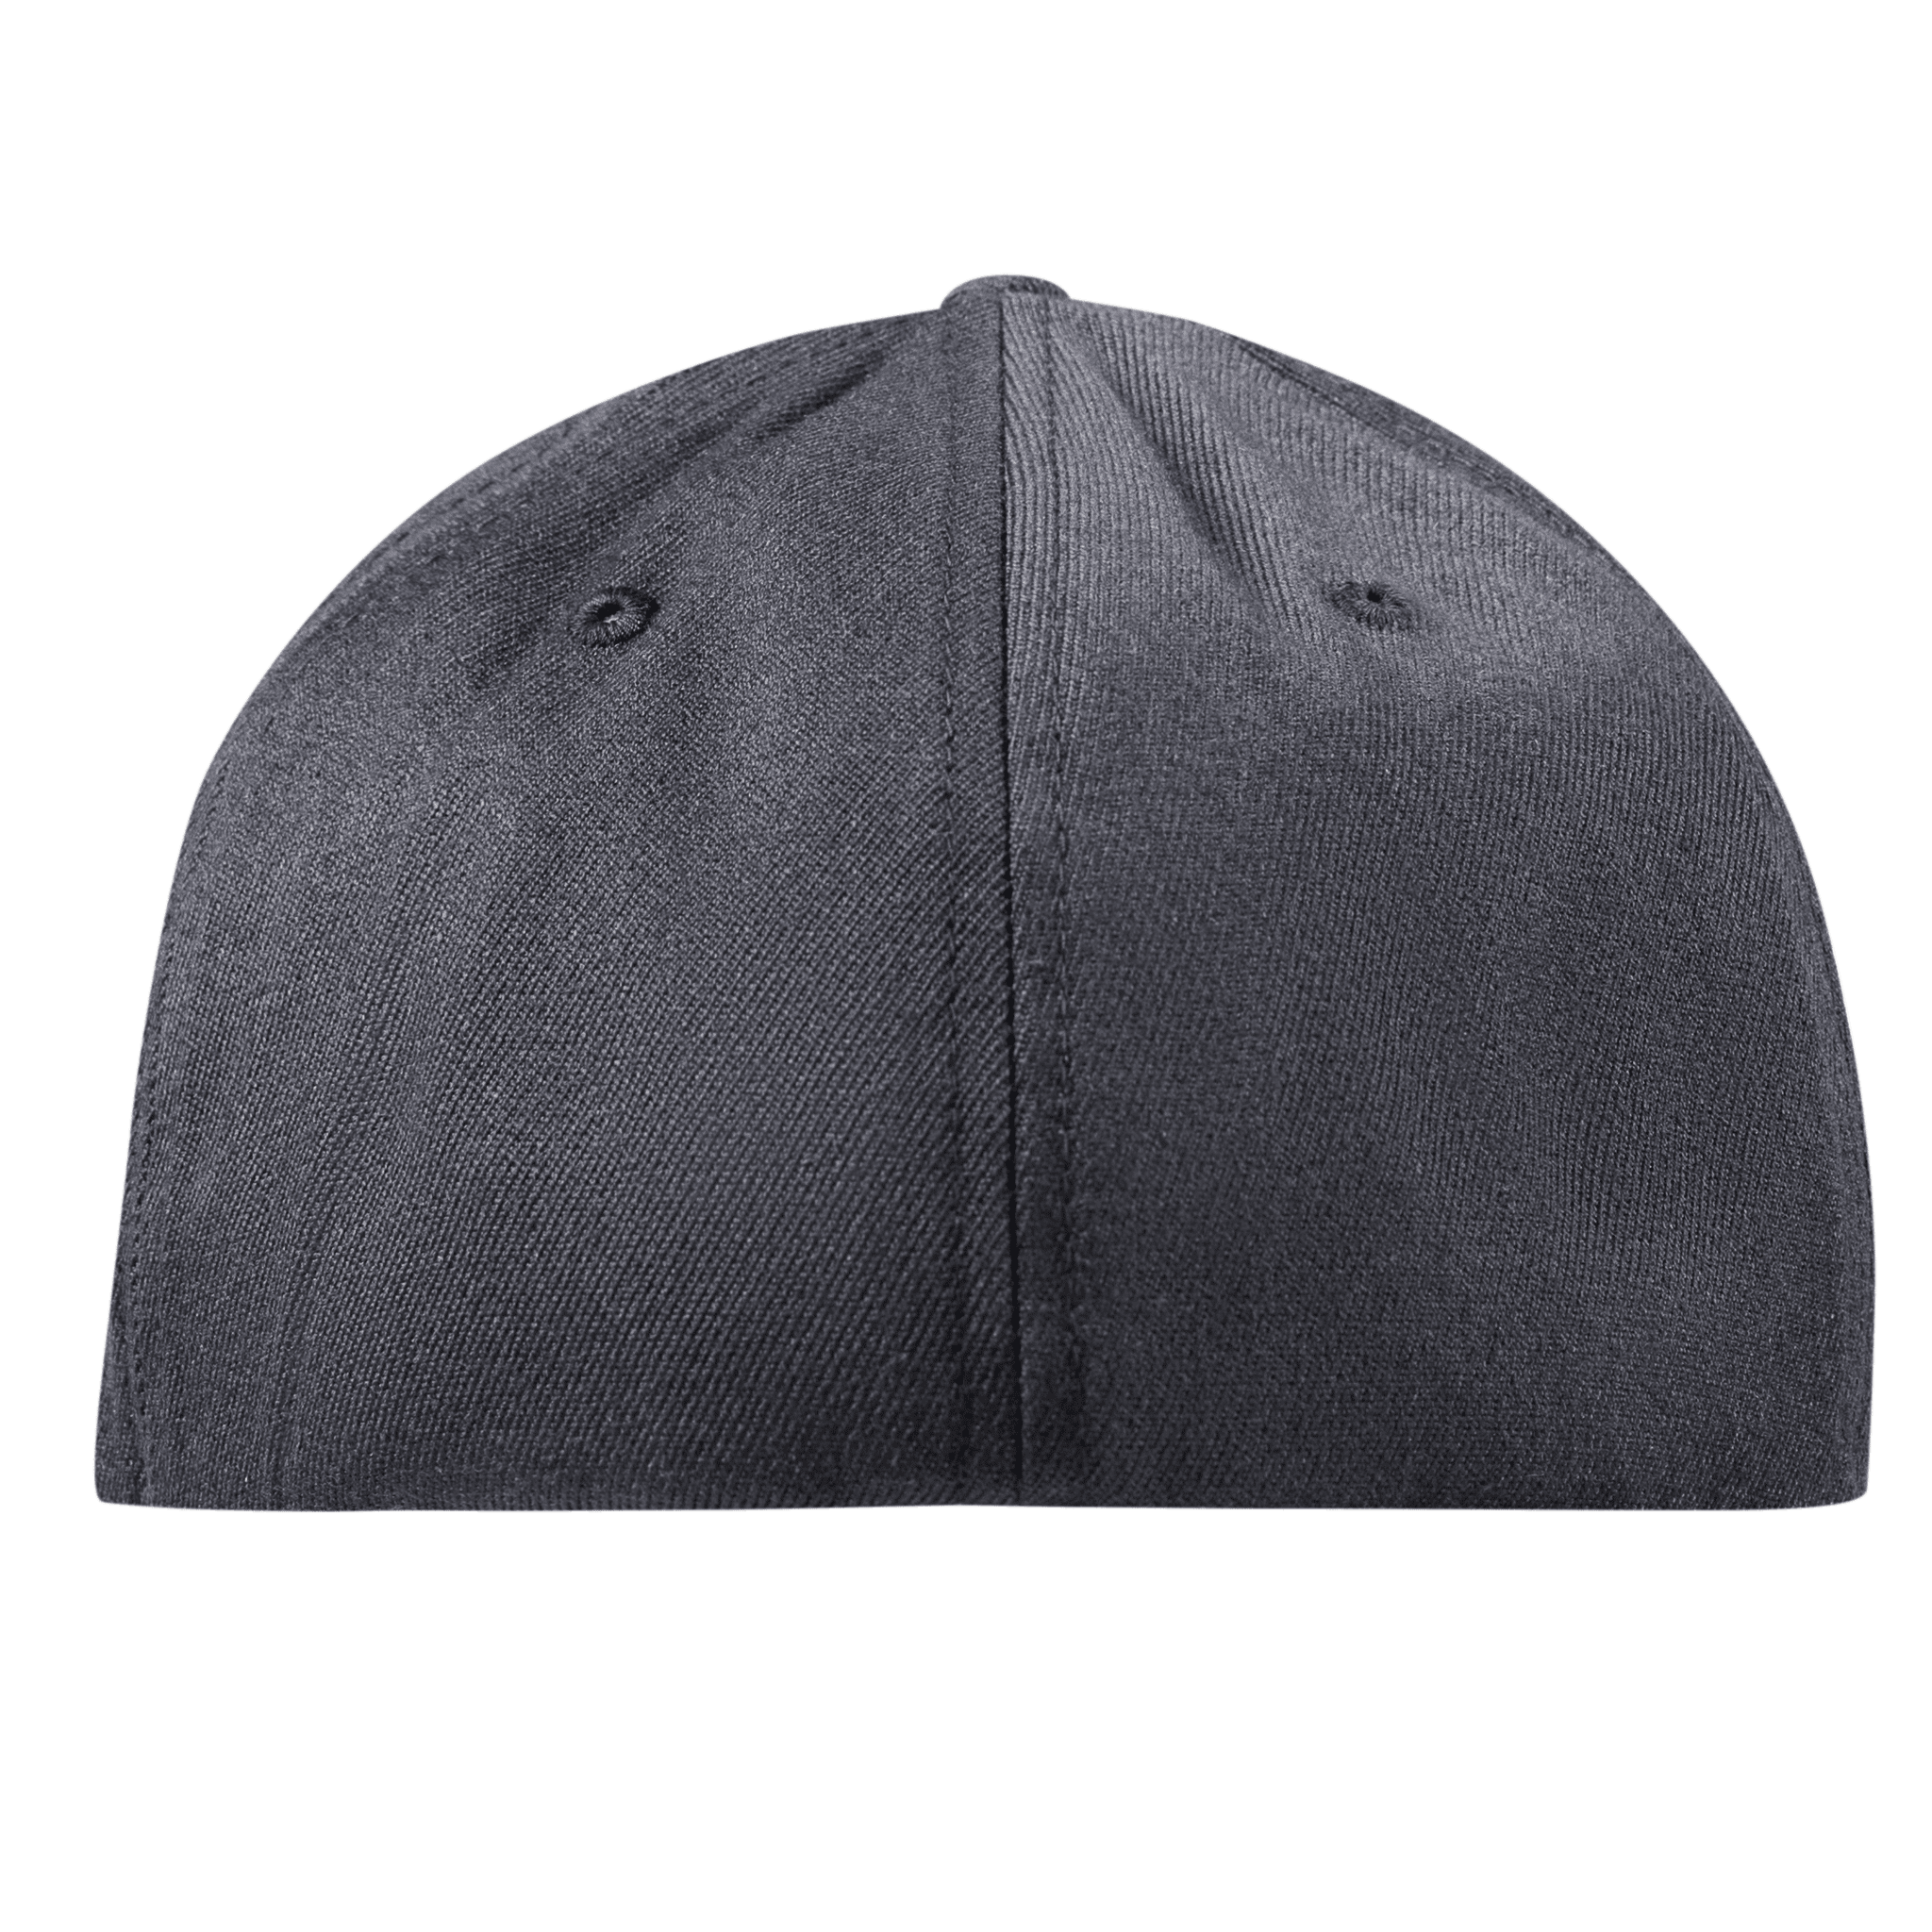 Oregon 33 Midnight Flexfit Fitted Back Charcoal